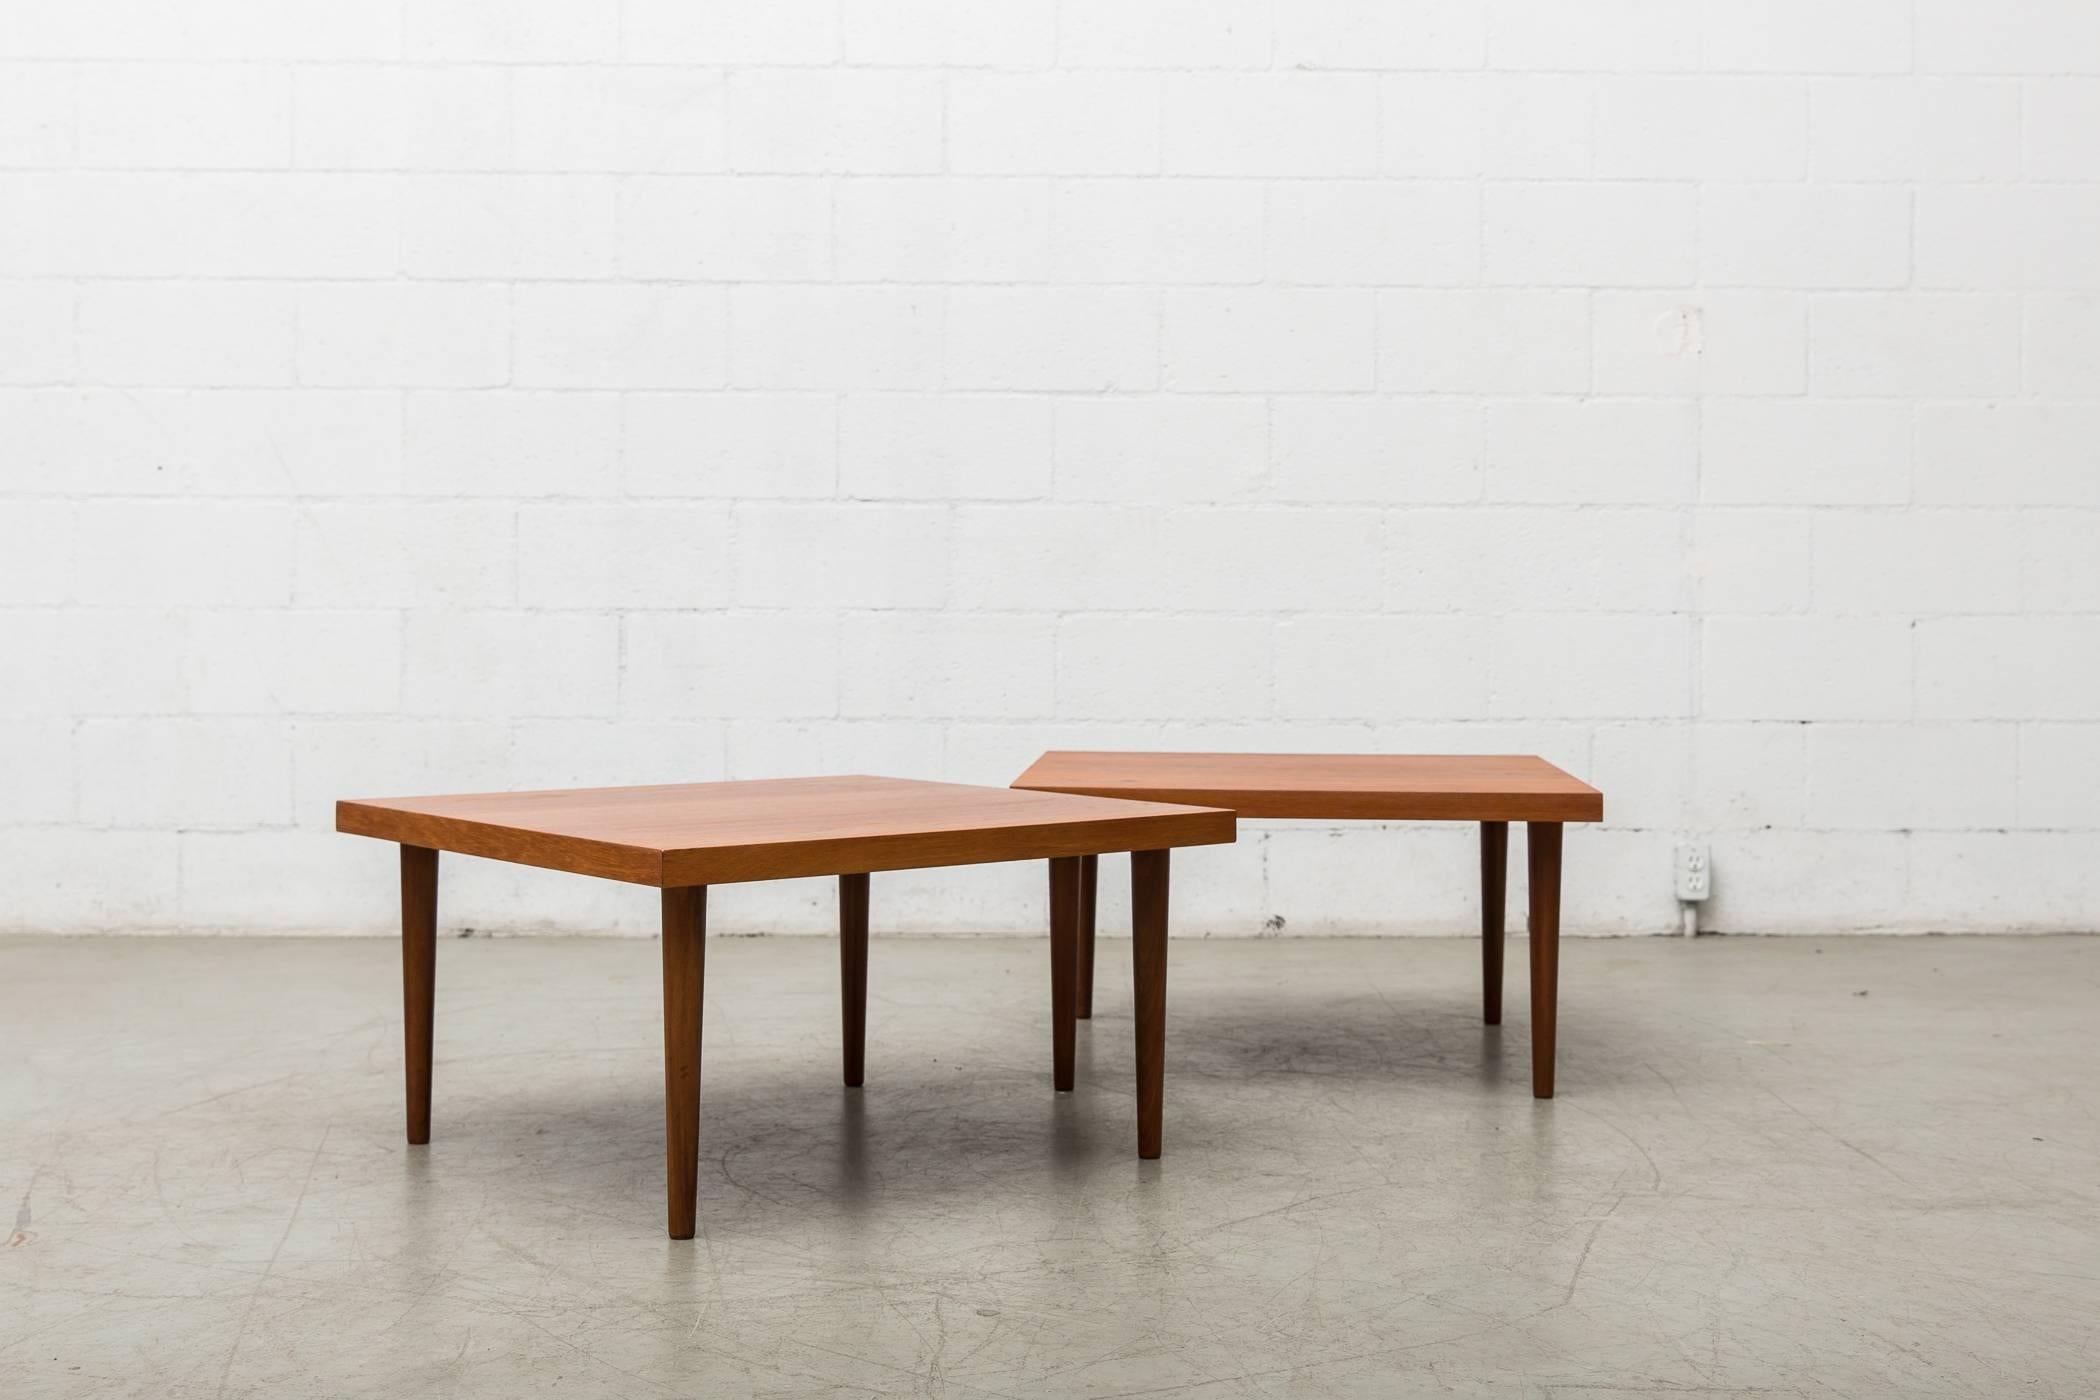 Matching pair of simplistic Mid-Century square teak coffee tables with round legs. Good original condition, nice grain pattern on each table. Set price.